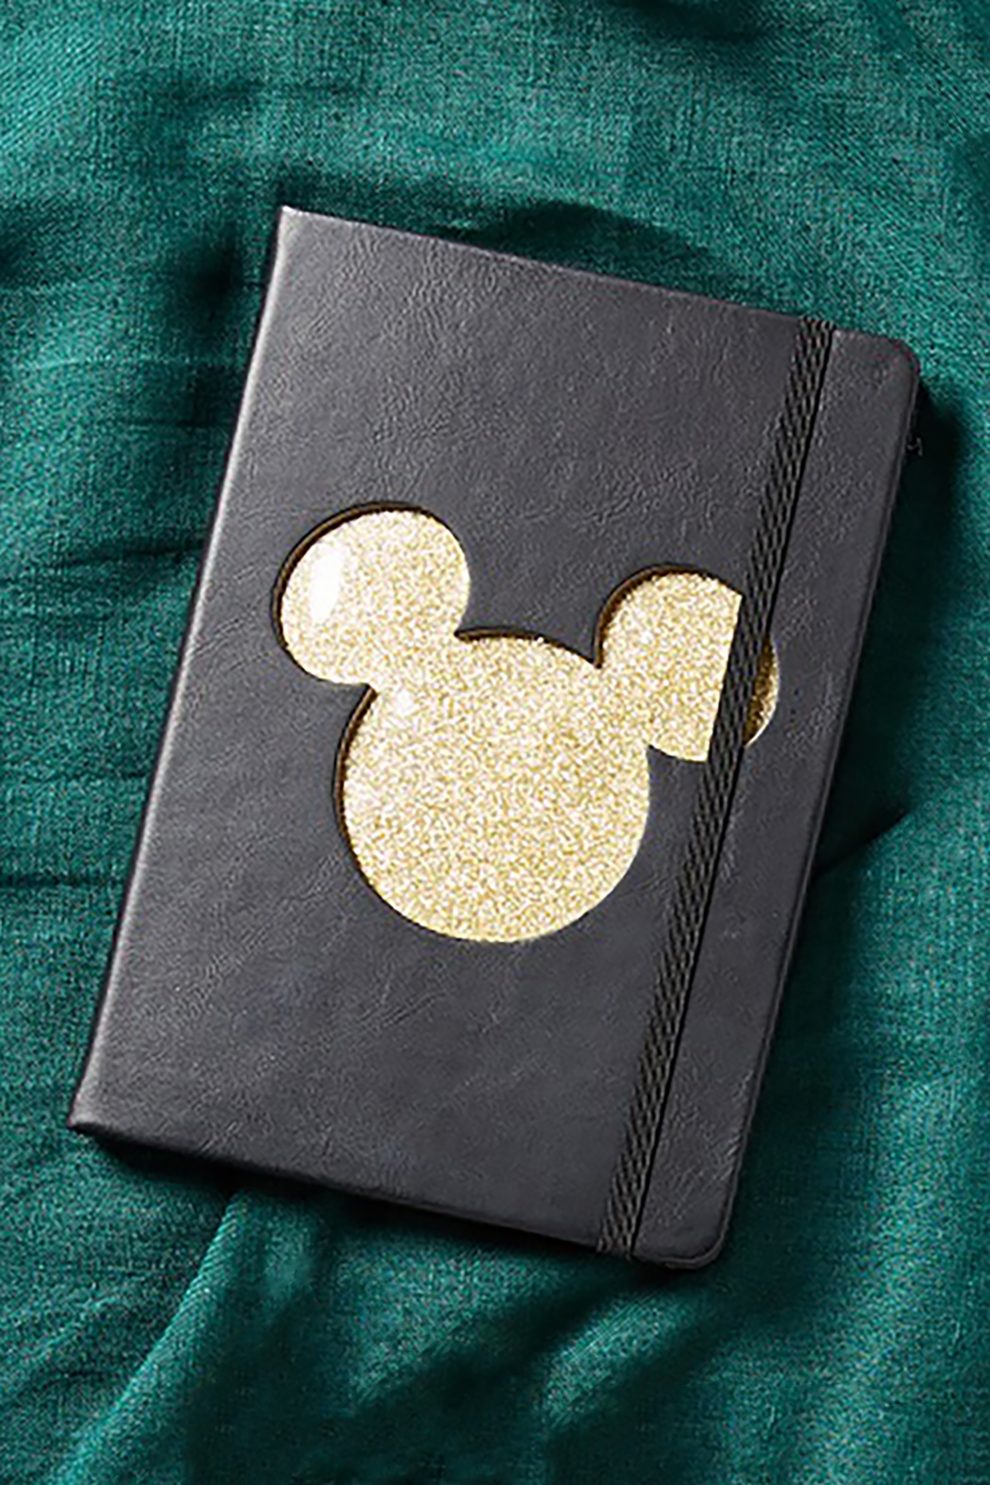 Adorable Disney Stationary and Accessories From Typo - Style